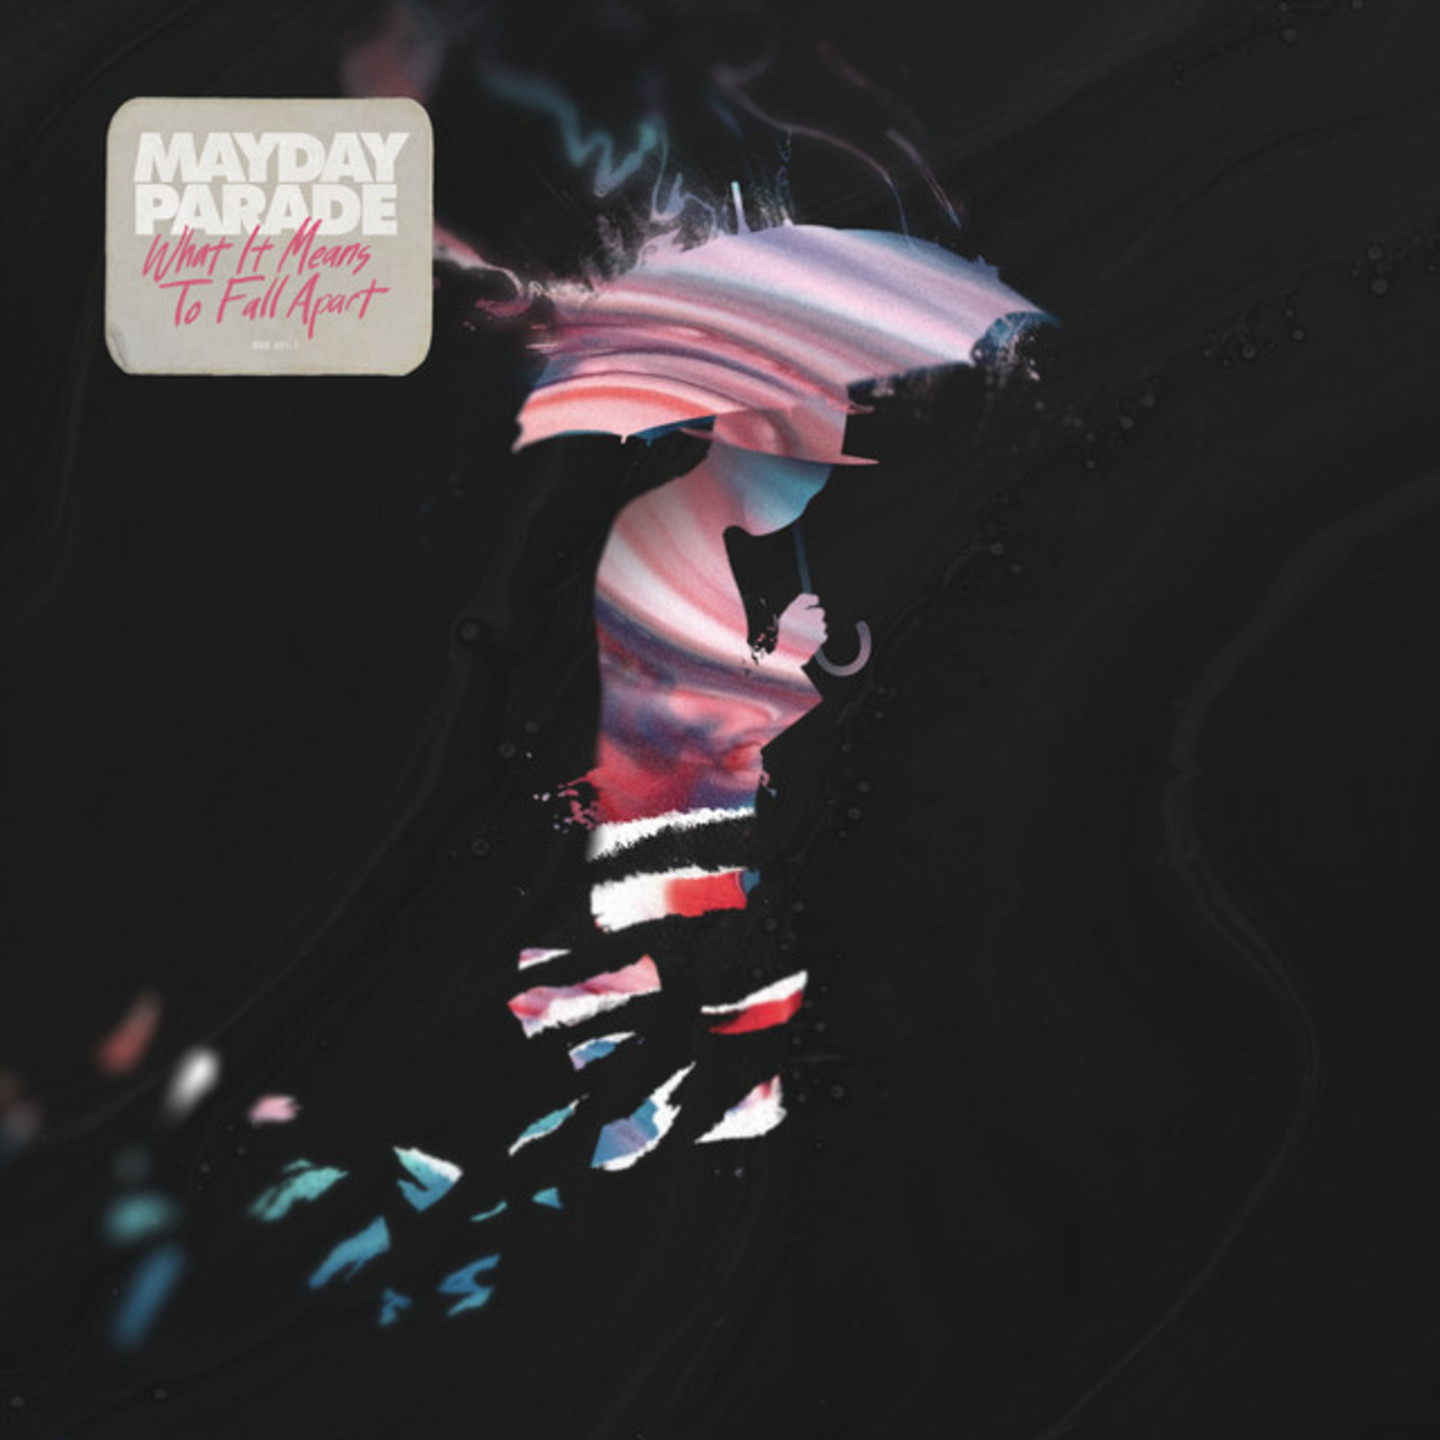 MAYDAY PARADE - What It Means To Fall Apart LP Light Pink Vinyl